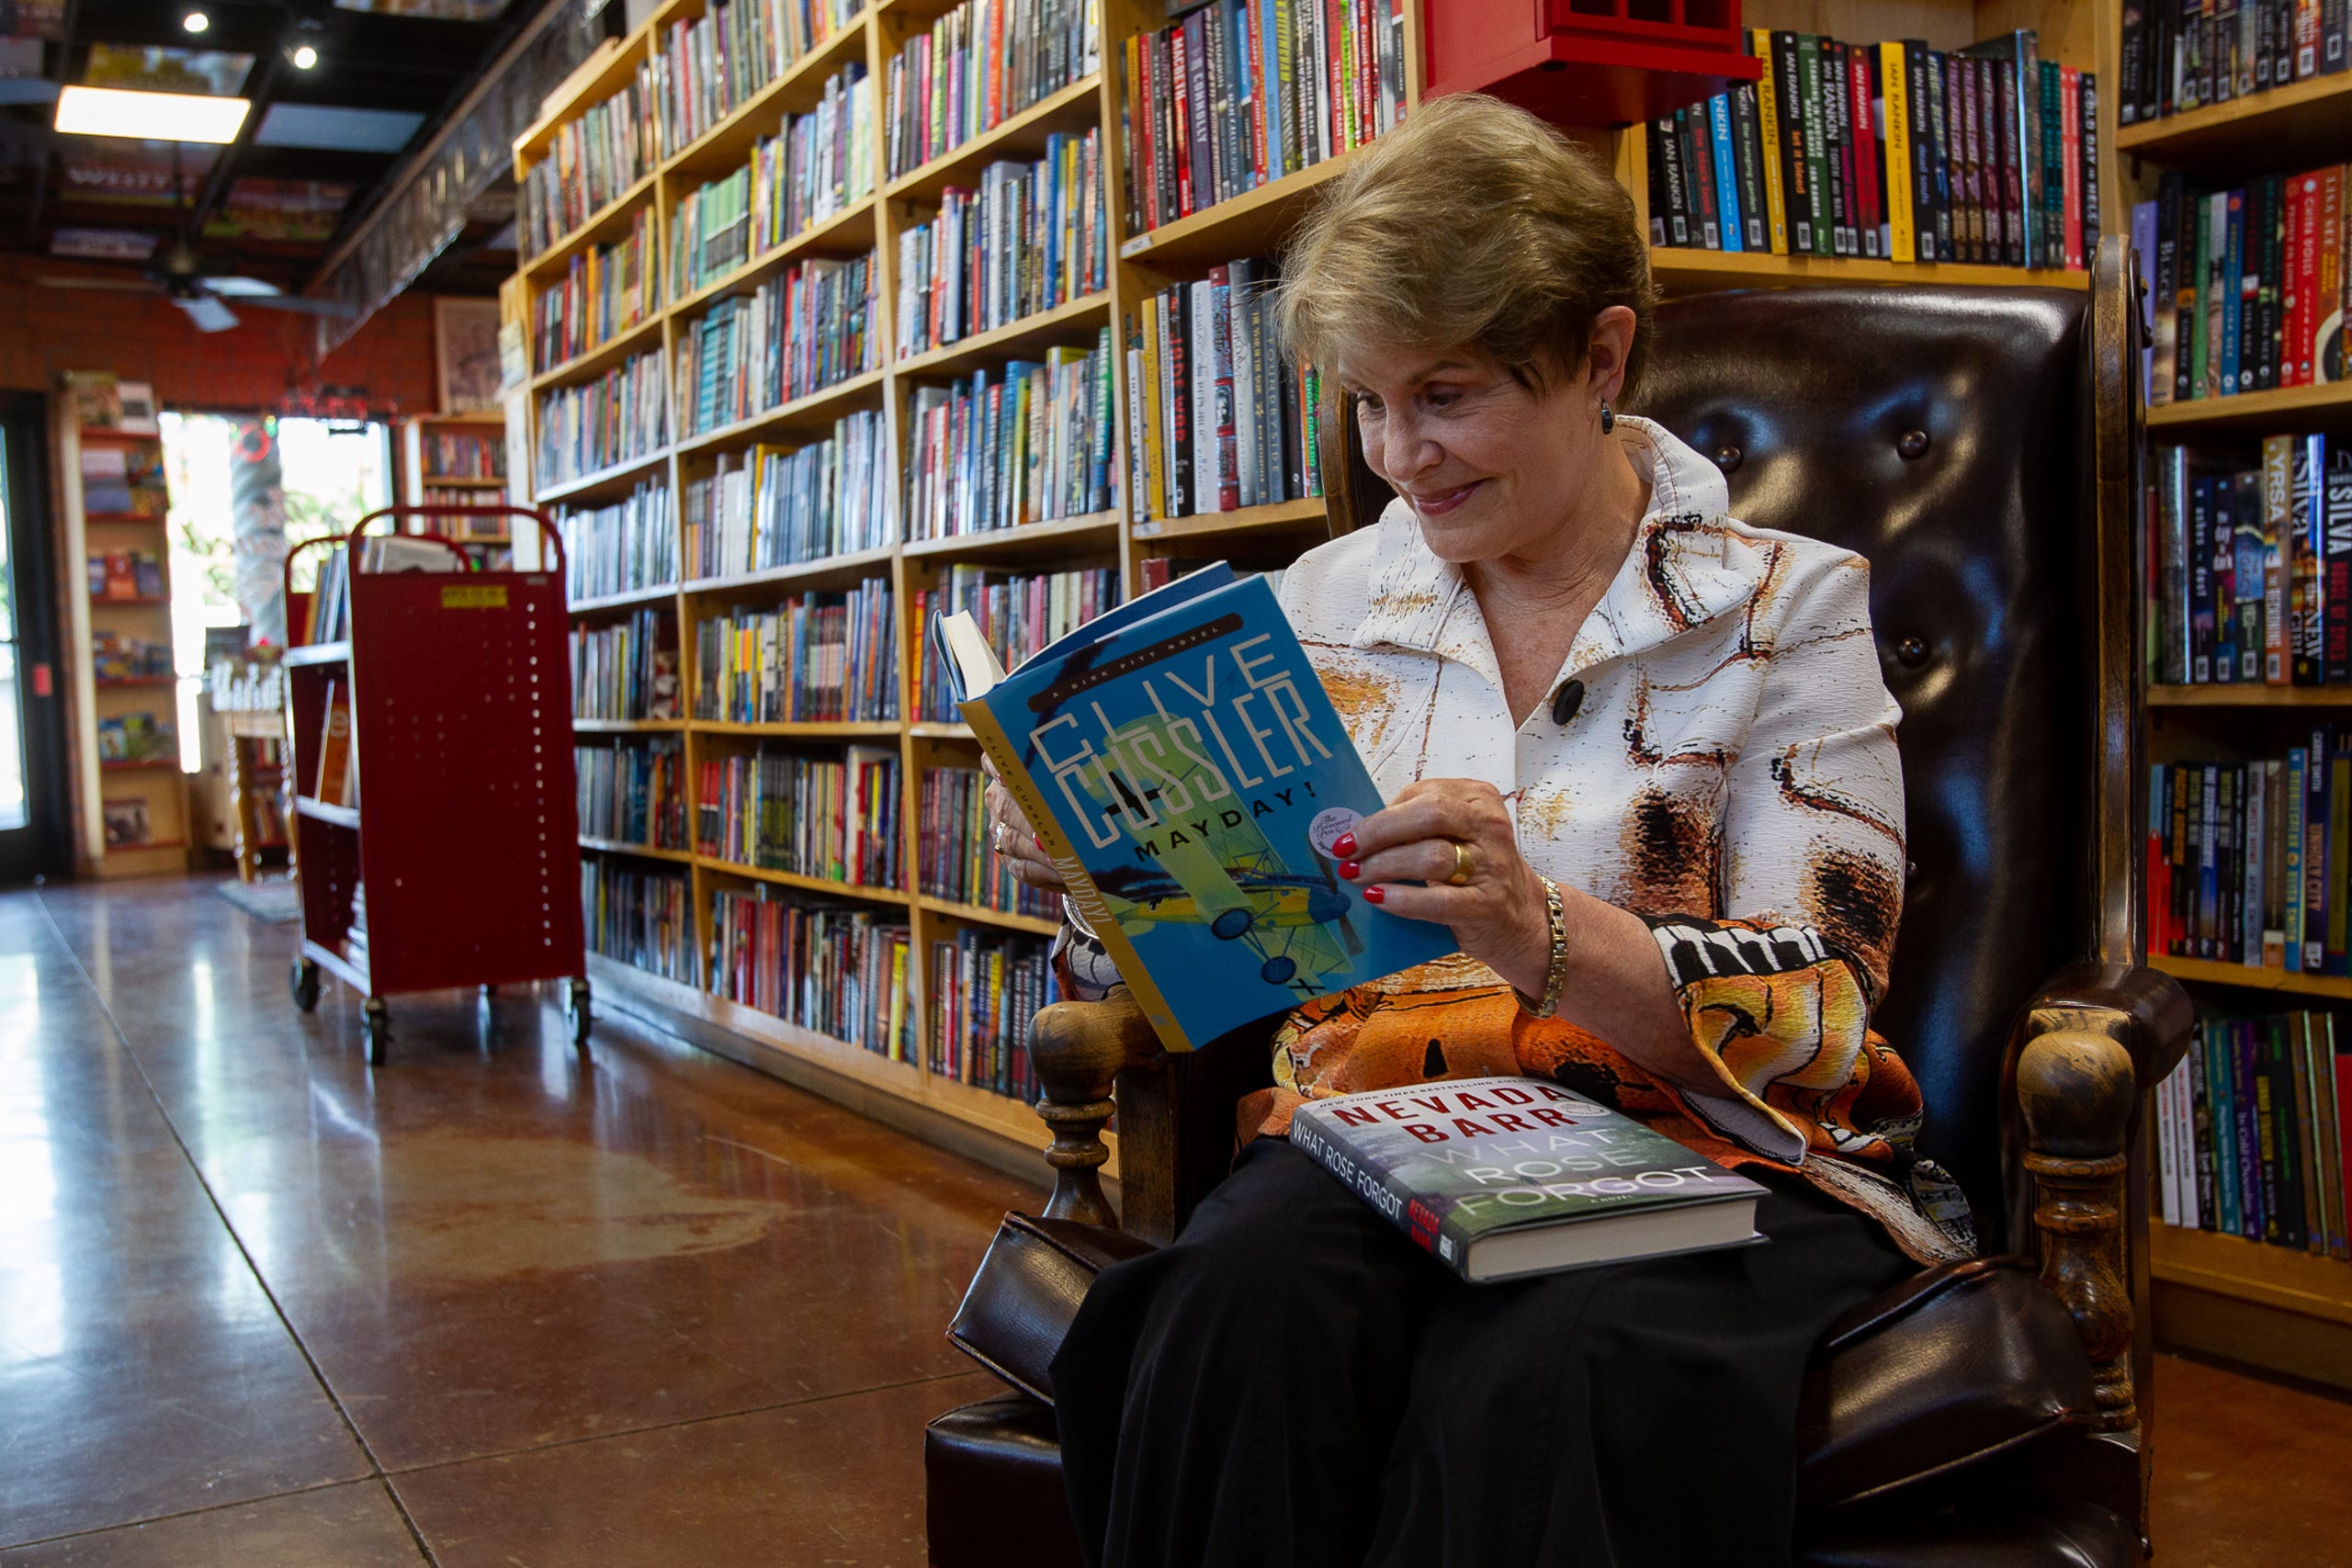 Barbara G. Peters started Poisoned Pen Bookstore 30 years ago.